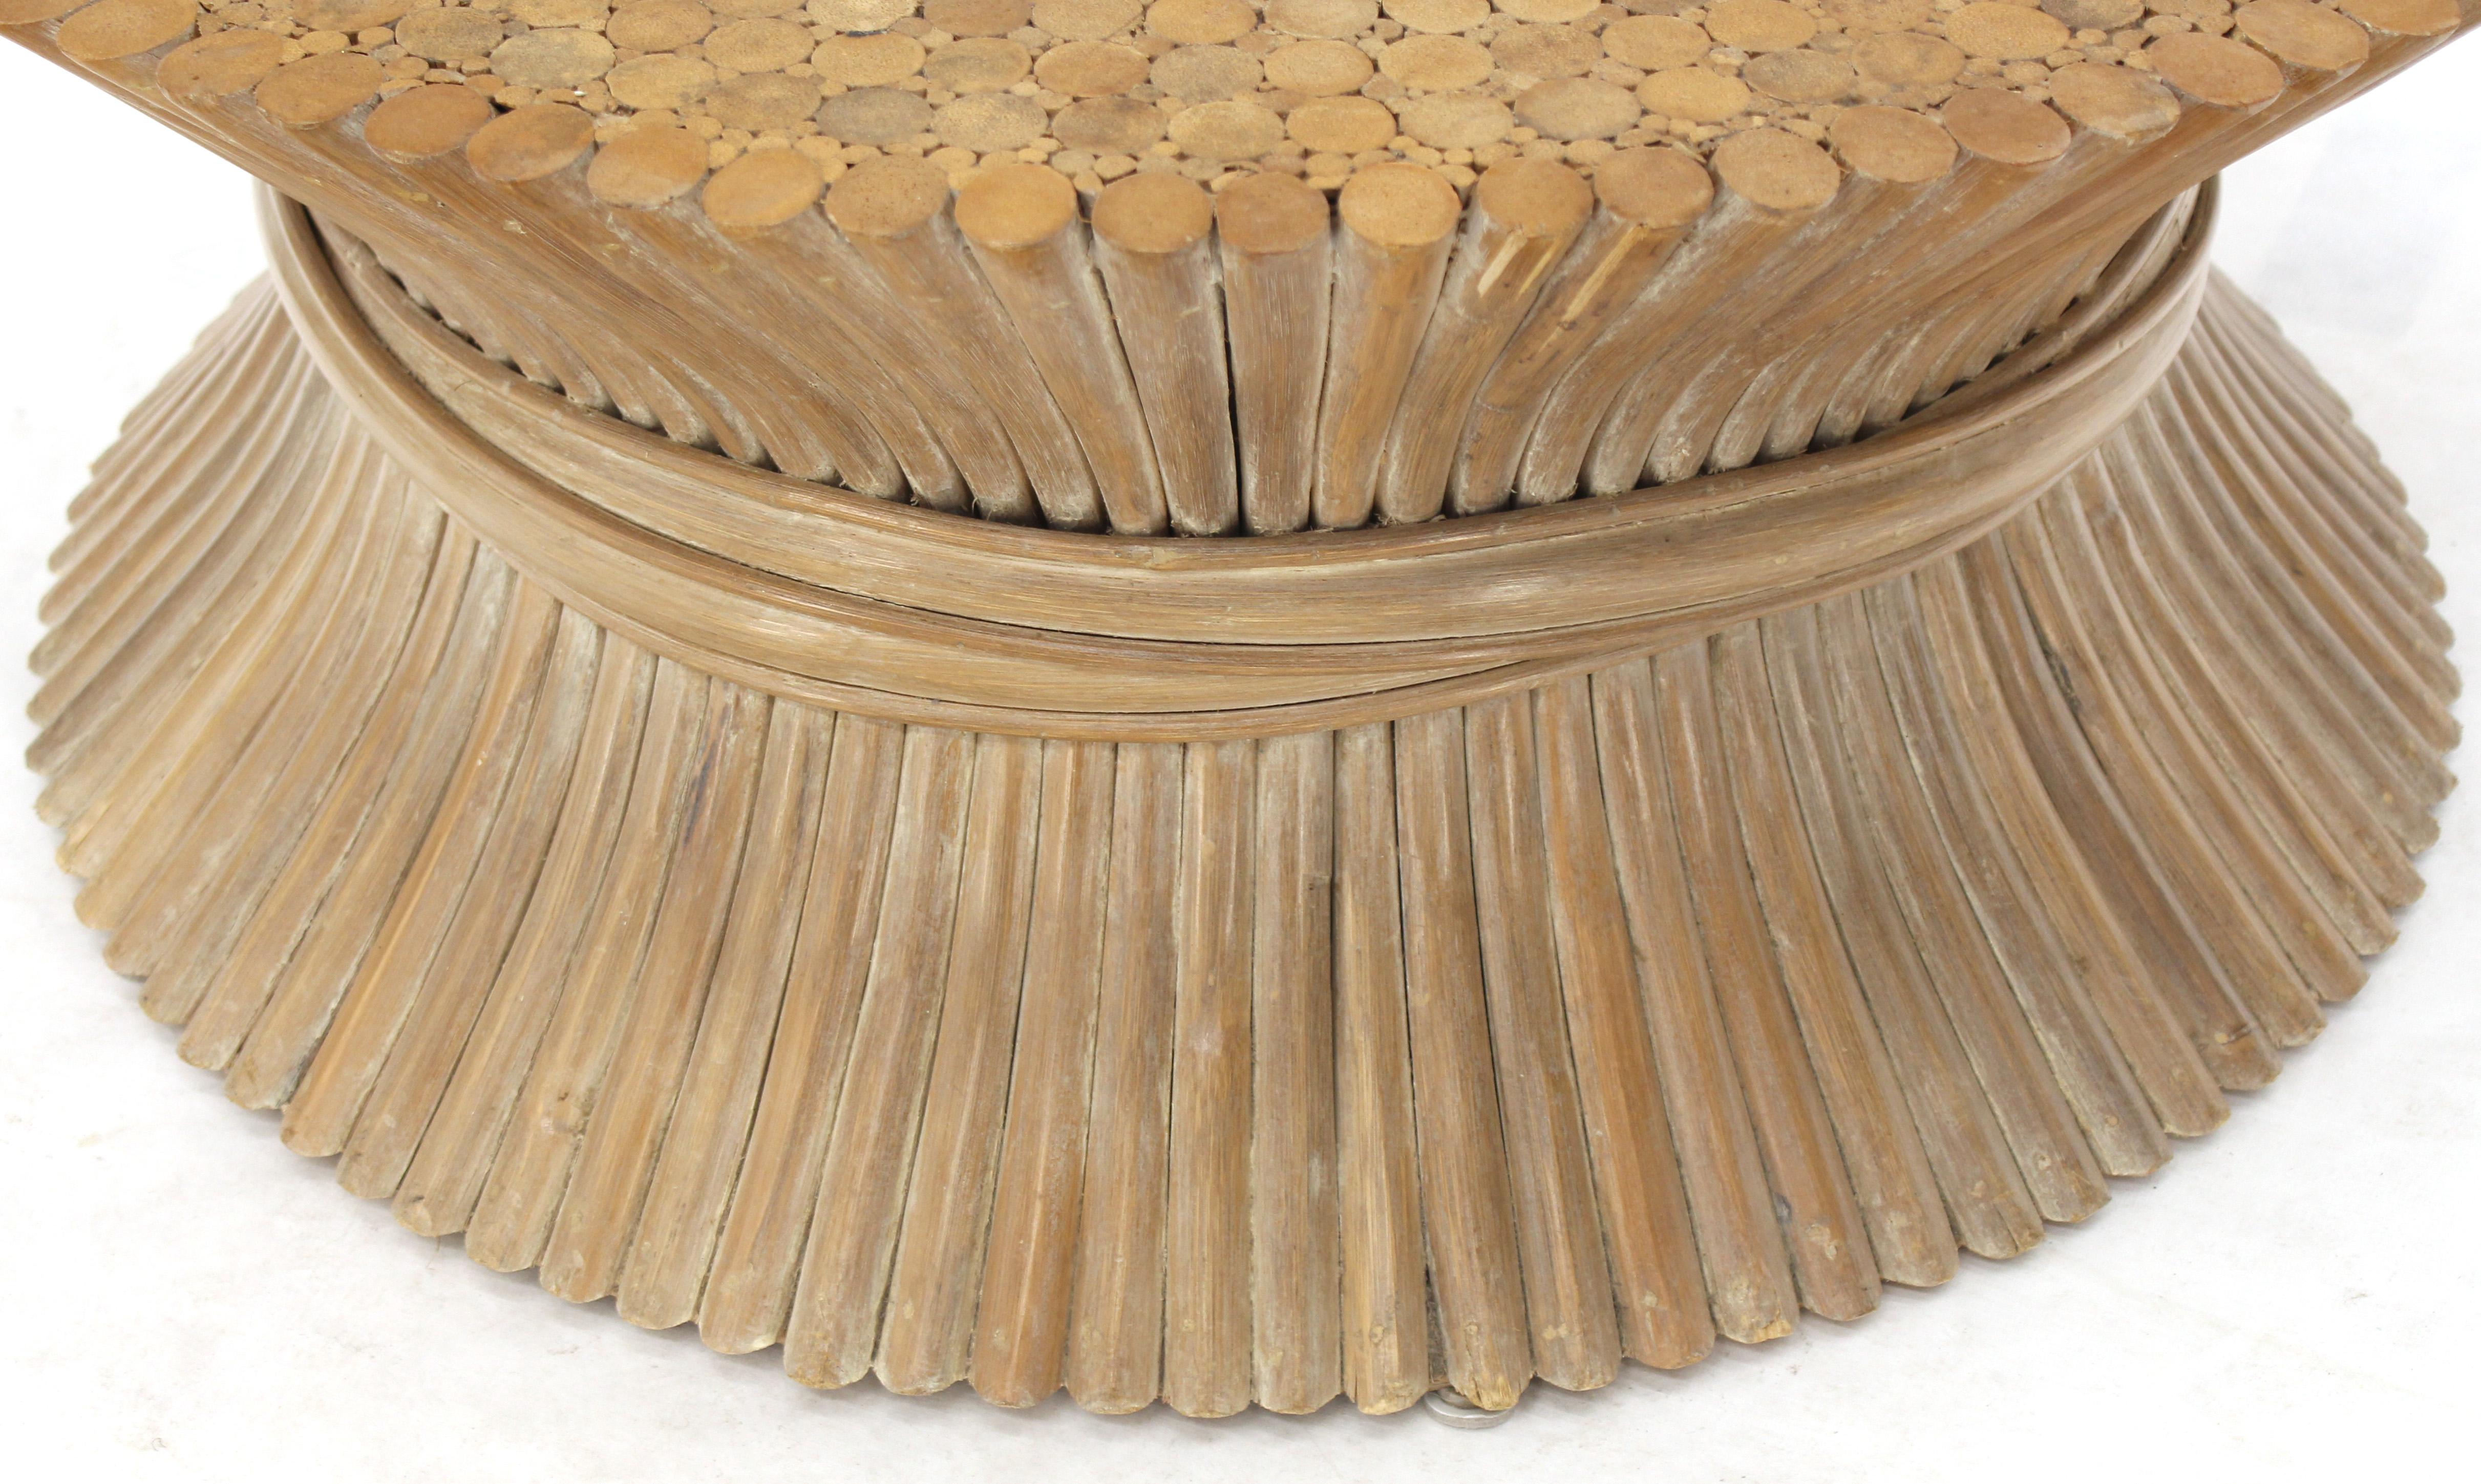 Round Wheat Bamboo Sheaf Base Coffee Table Mid-Century Modern McGuire In Excellent Condition For Sale In Rockaway, NJ